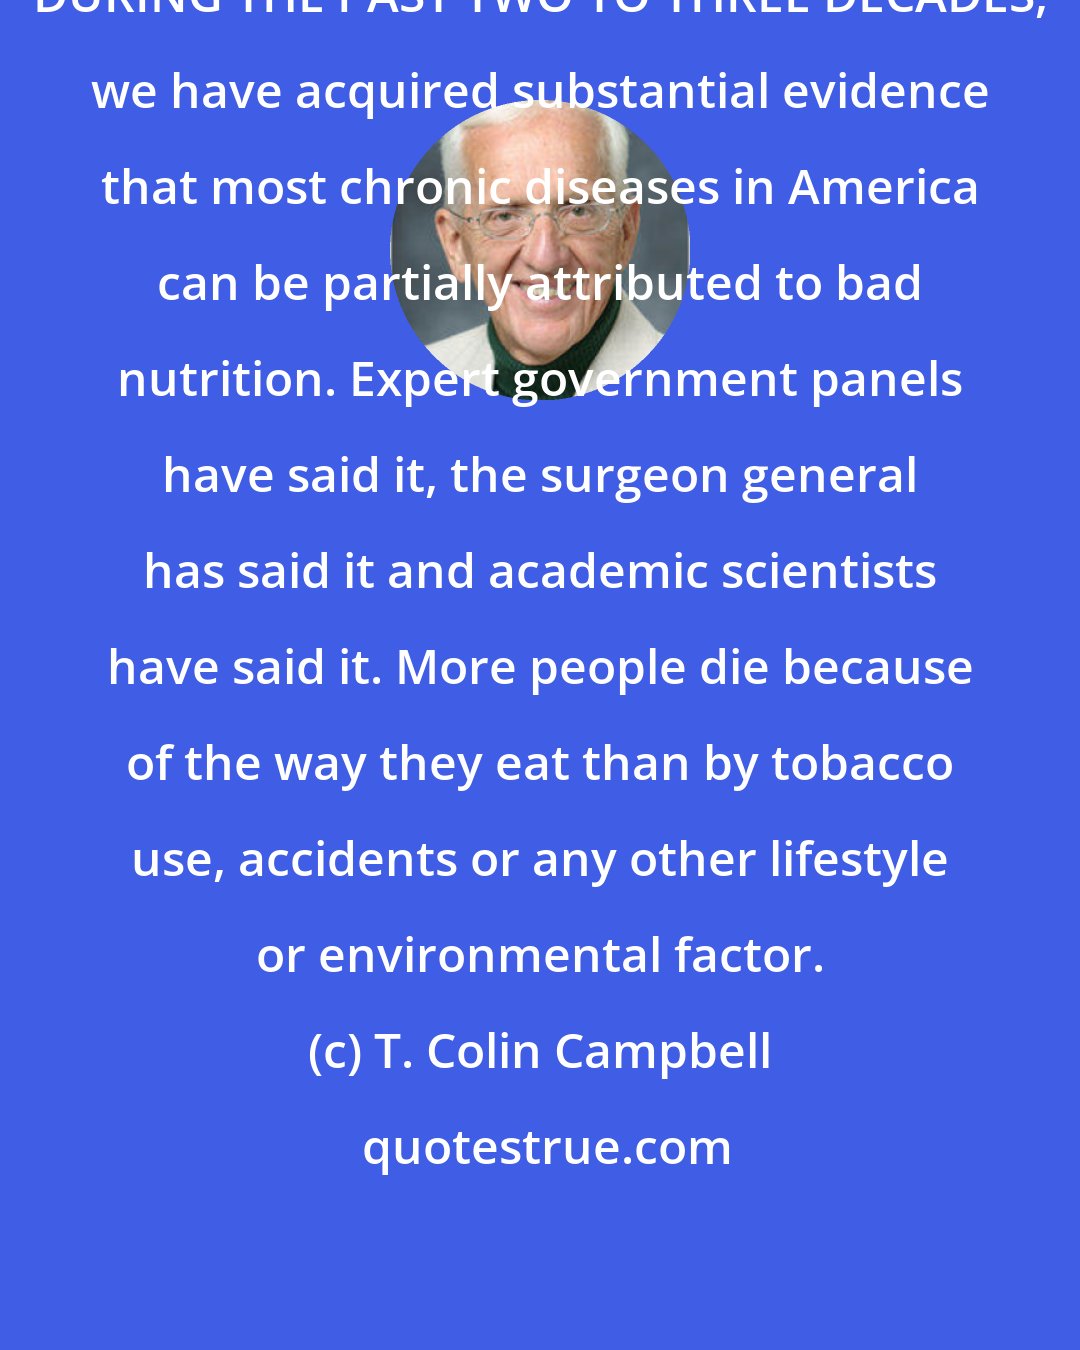 T. Colin Campbell: DURING THE PAST TWO TO THREE DECADES, we have acquired substantial evidence that most chronic diseases in America can be partially attributed to bad nutrition. Expert government panels have said it, the surgeon general has said it and academic scientists have said it. More people die because of the way they eat than by tobacco use, accidents or any other lifestyle or environmental factor.